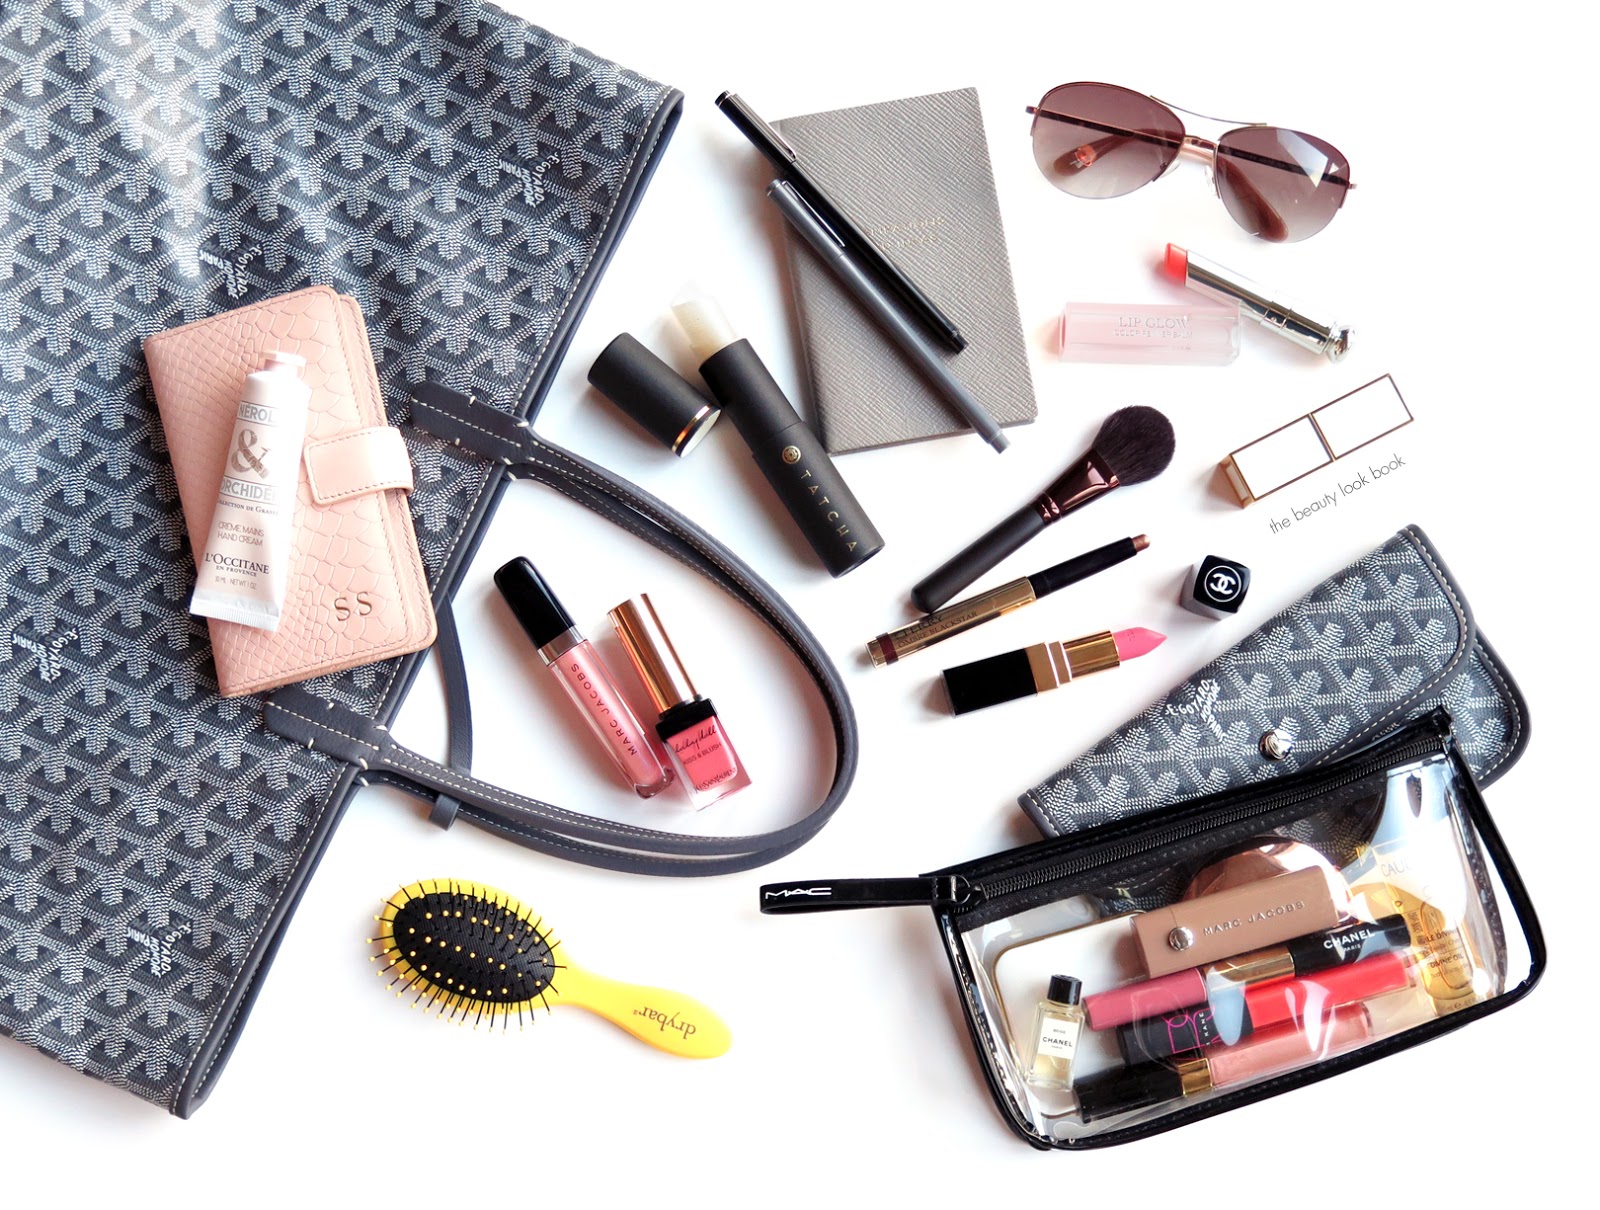 Inside My Bag - The Beauty Look Book